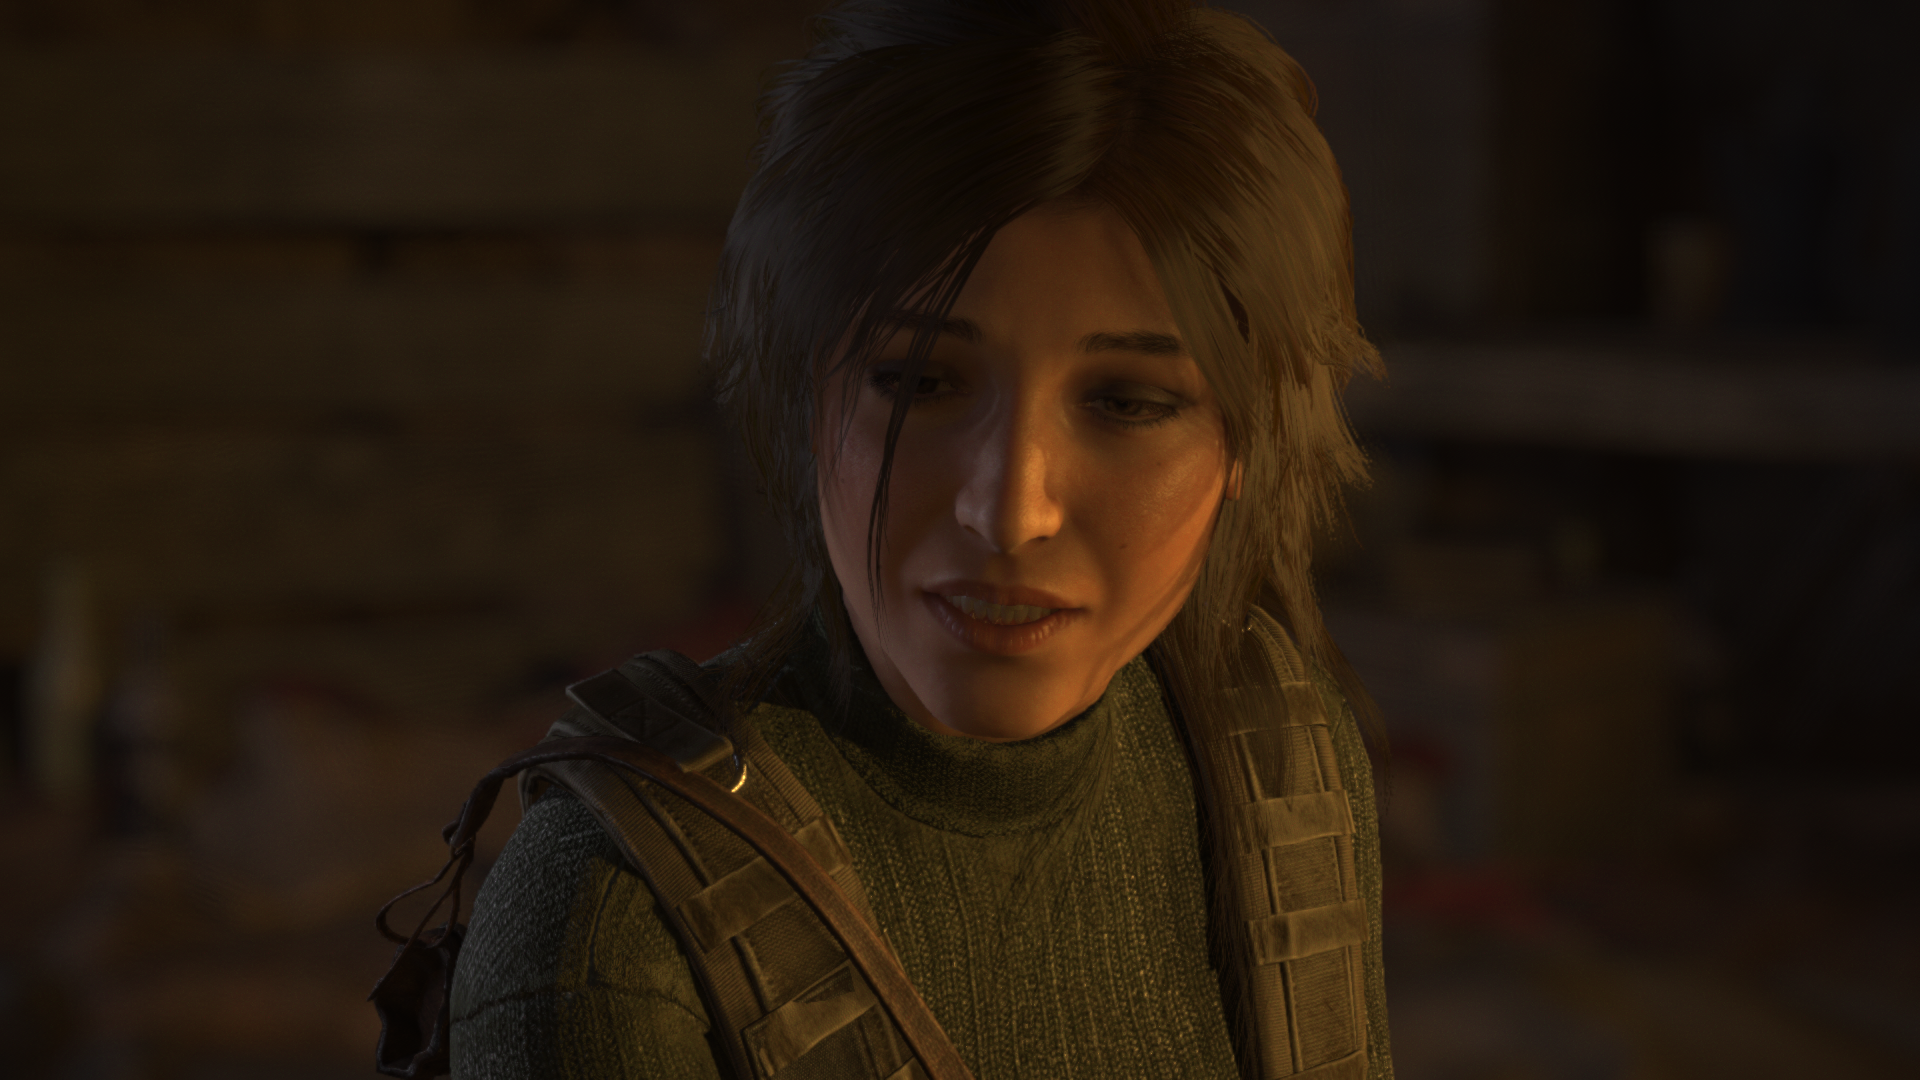 General 1920x1080 Rise of the Tomb Raider Tomb Raider Lara Croft (Tomb Raider) face video game girls PC gaming video games screen shot video game characters